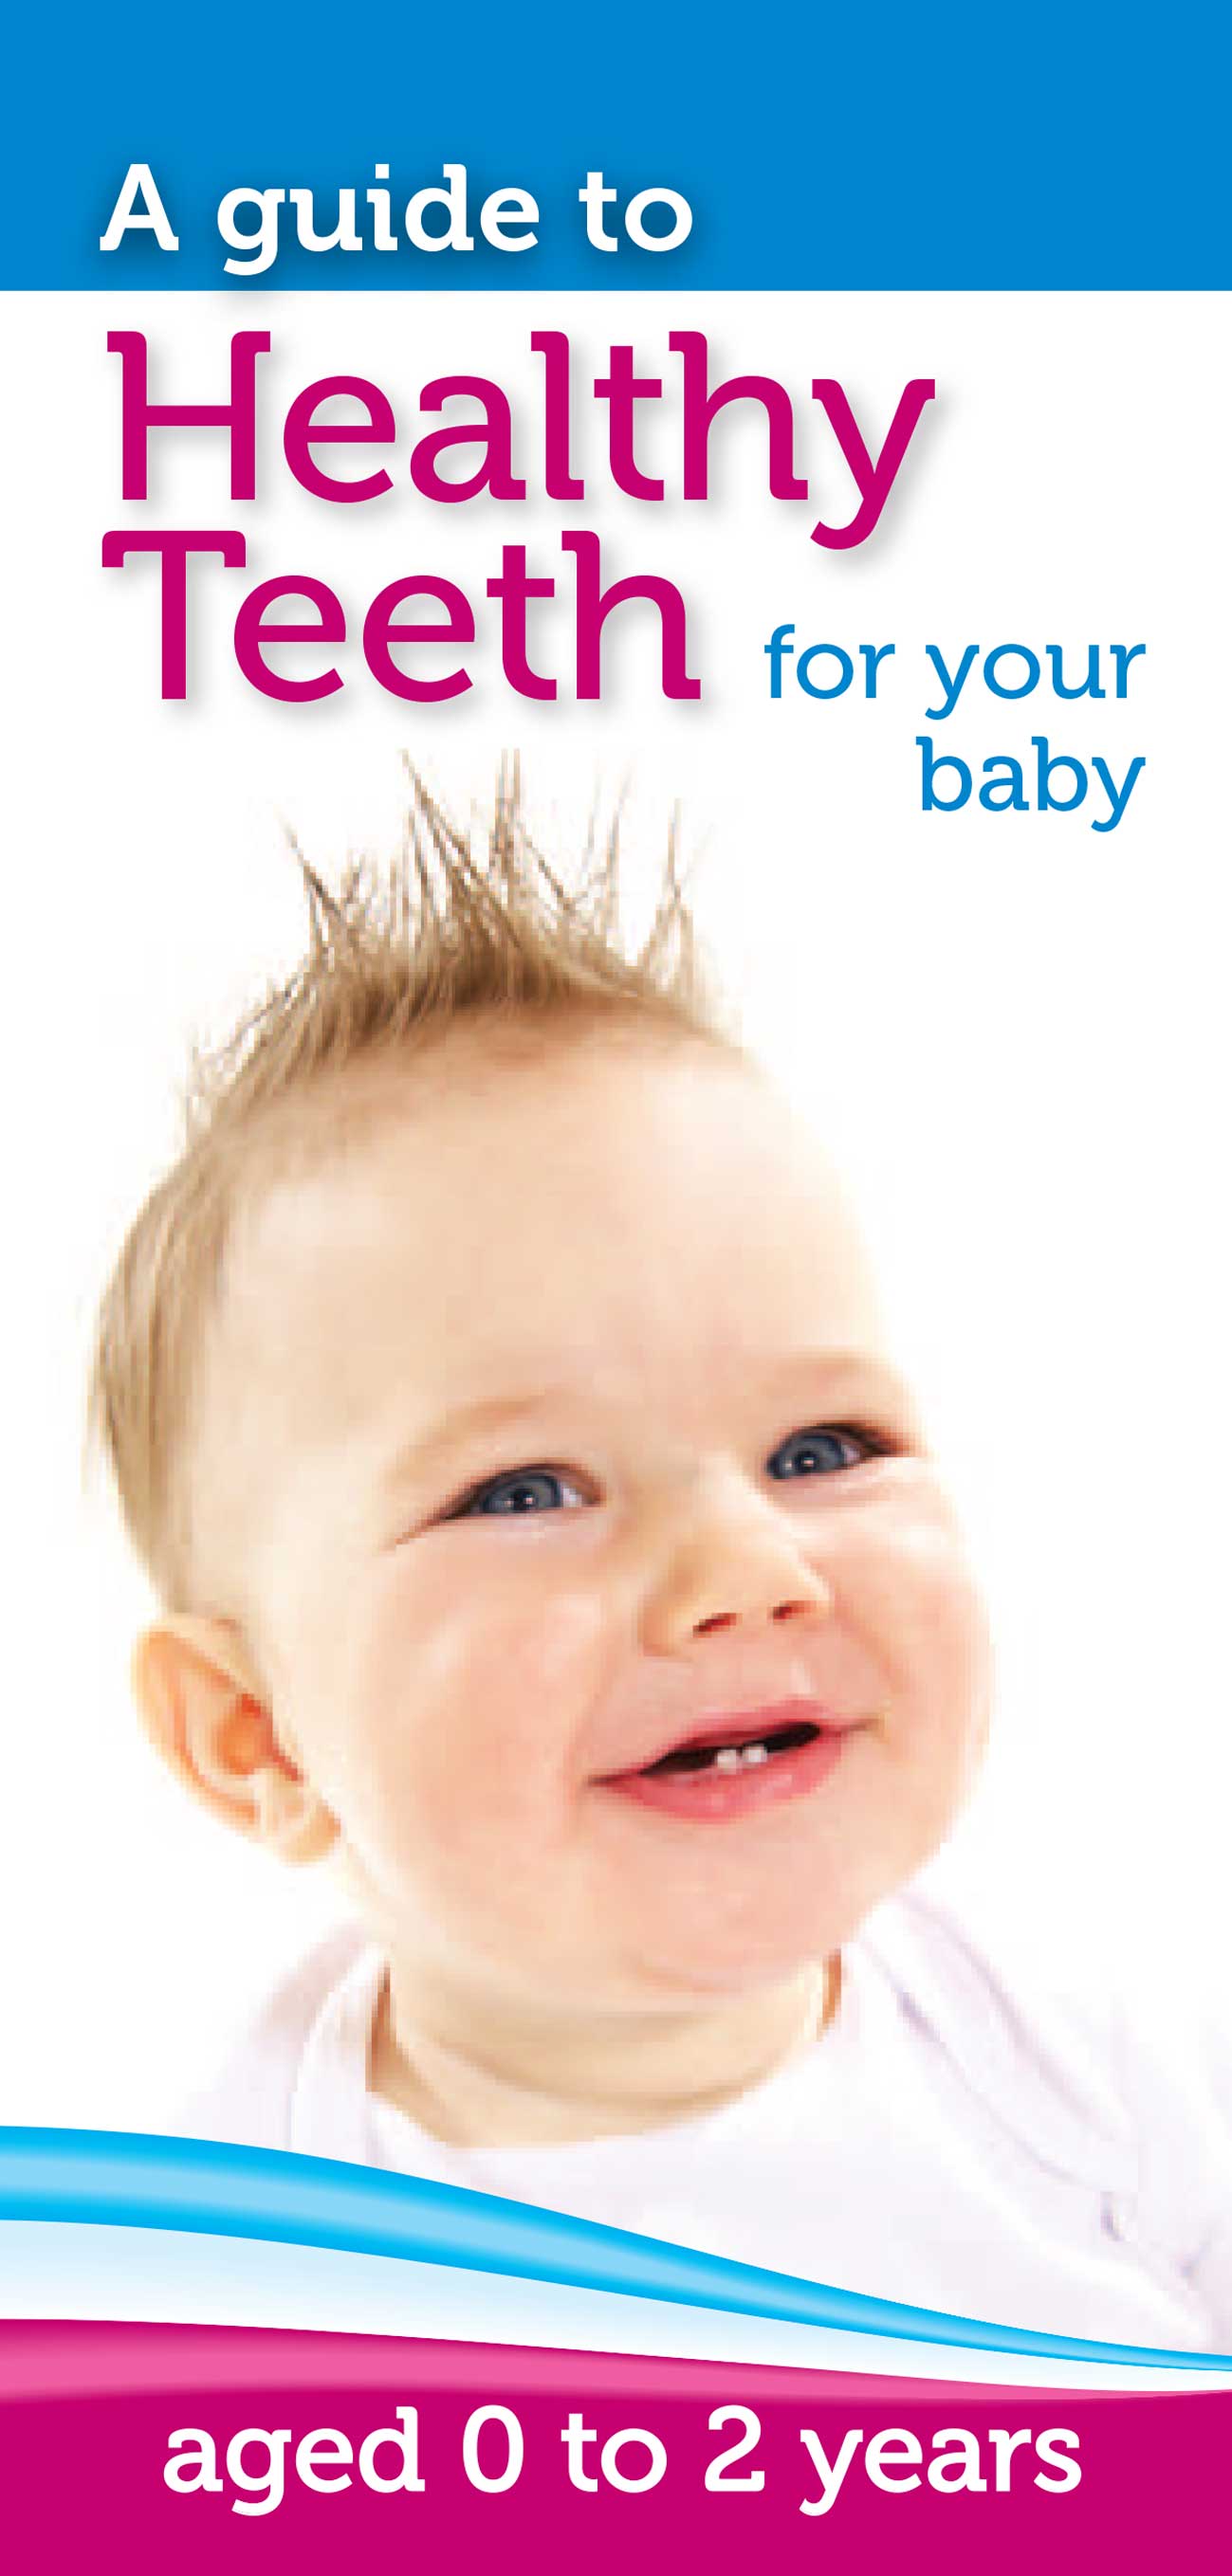 Healthy Teeth for your baby